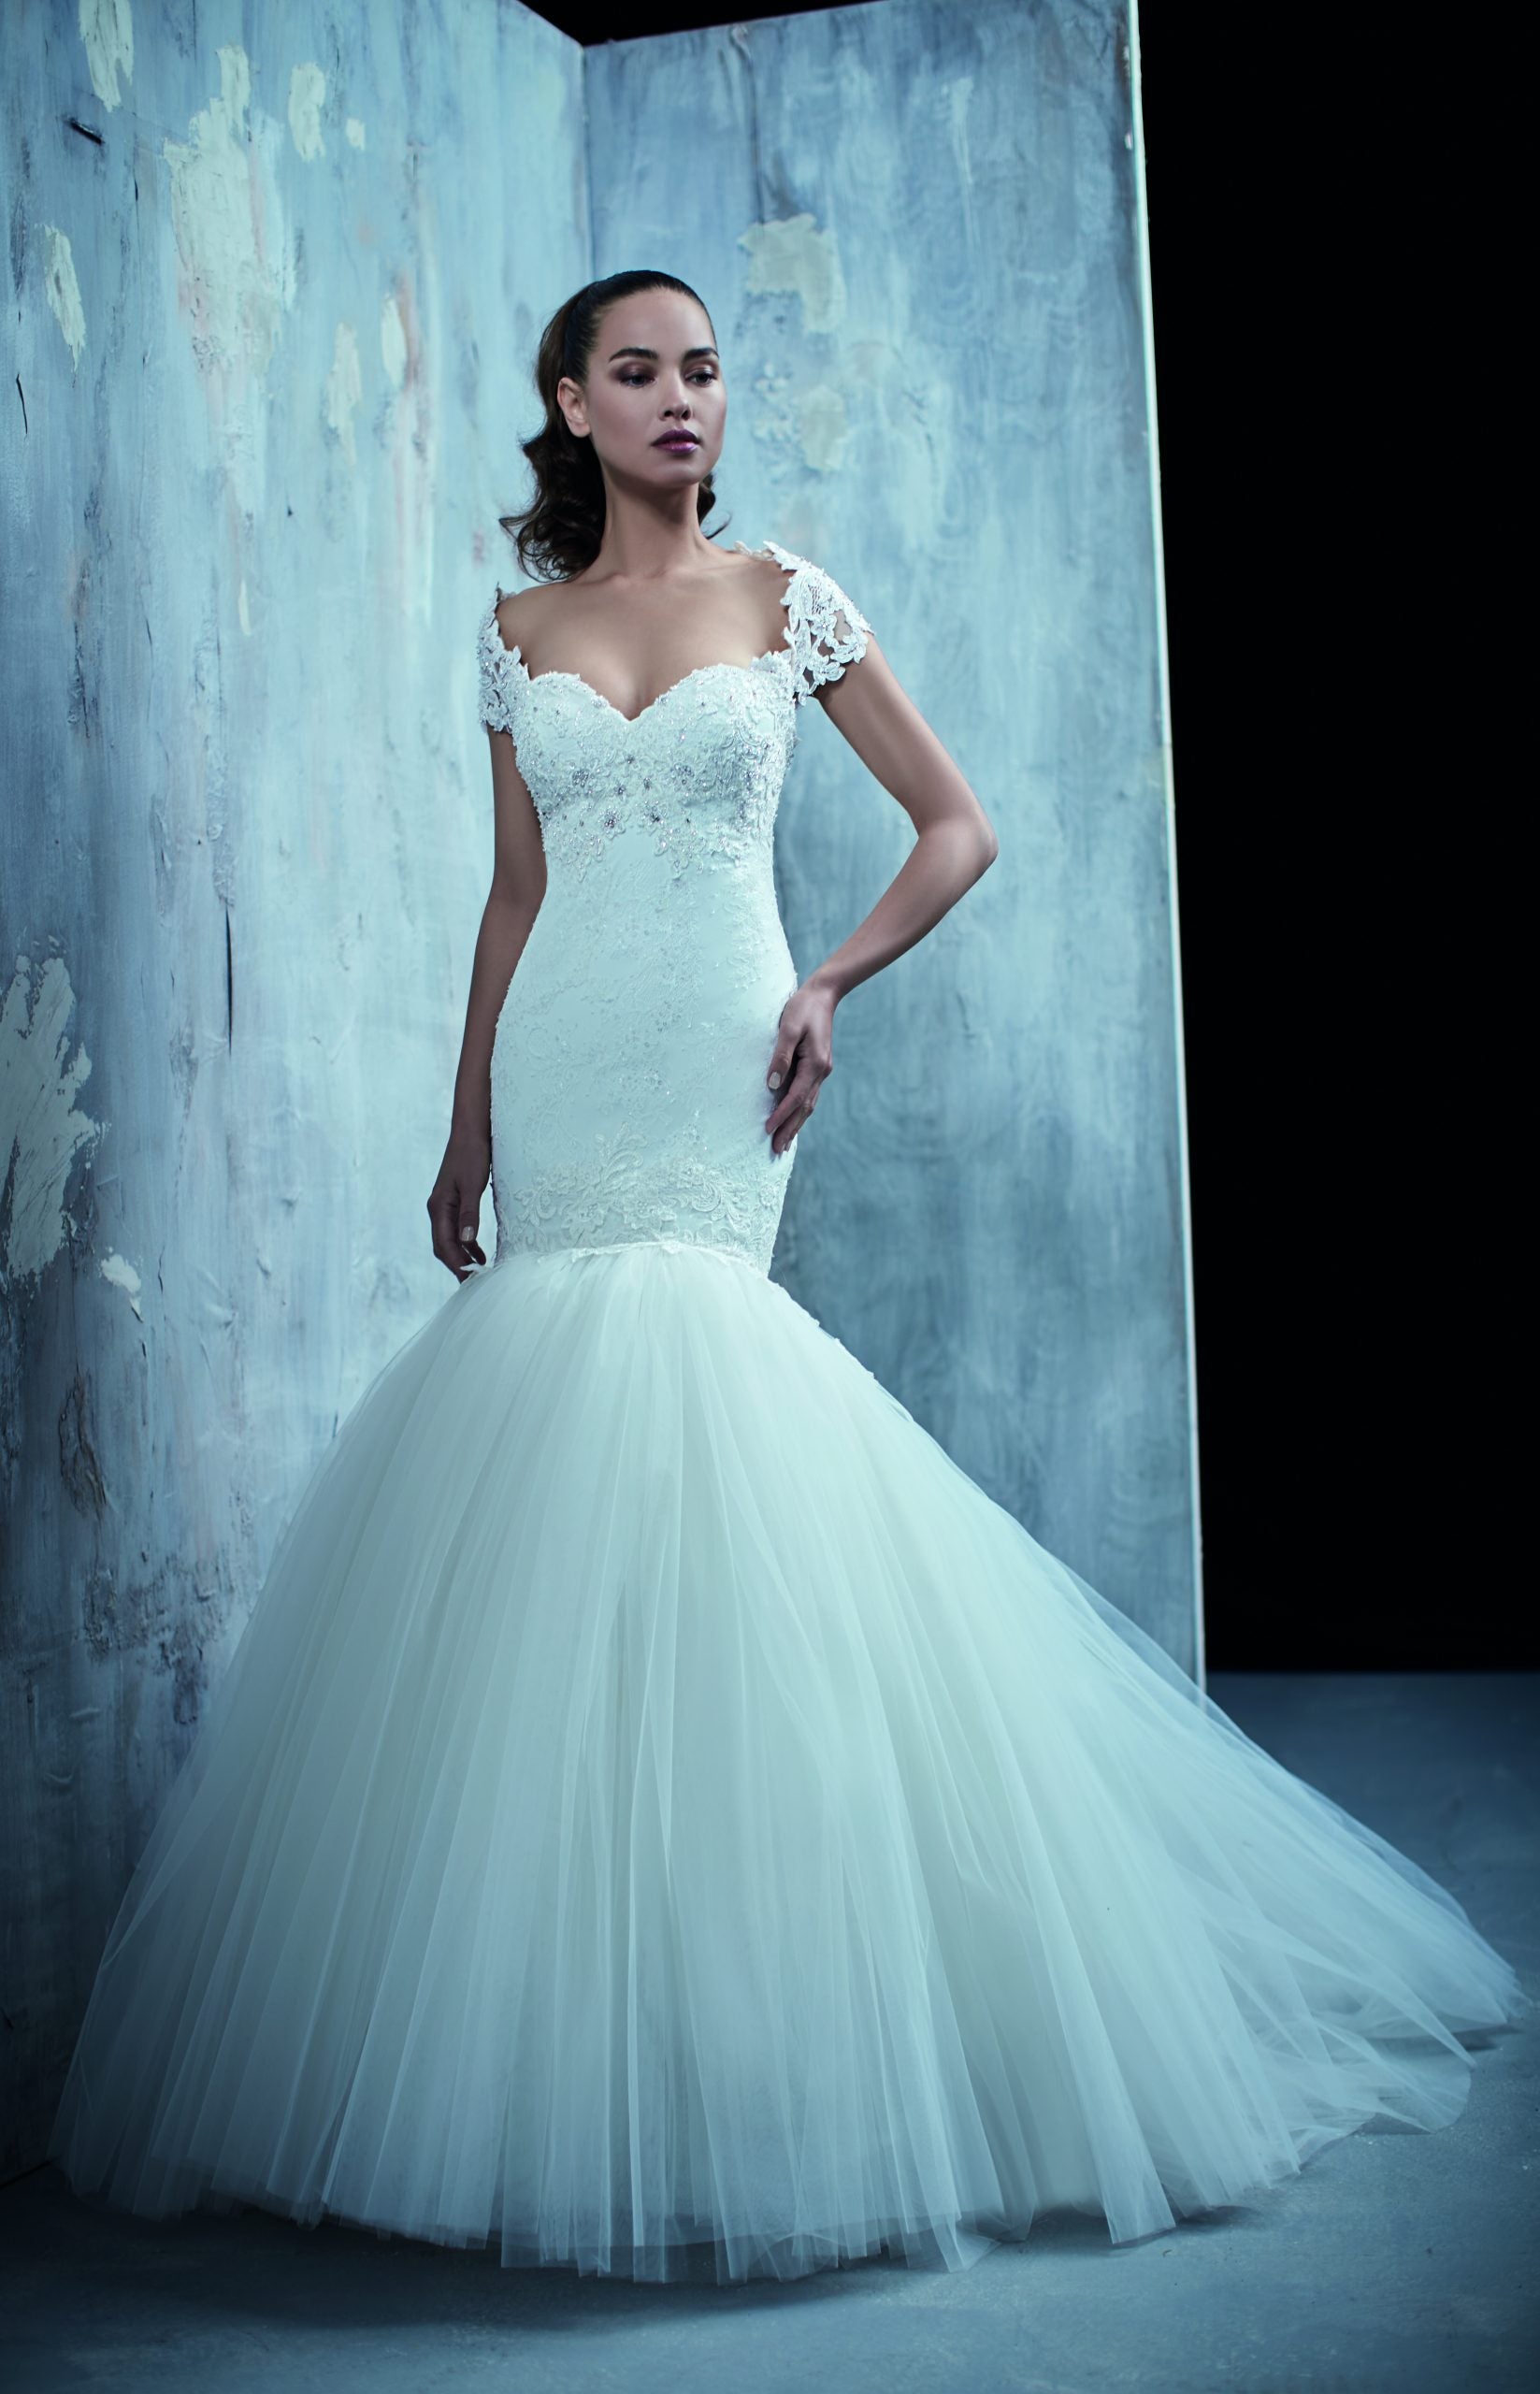 Strapless Sweetheart Neckline Fit And Flare Wedding Dress With Petal  Embroidered Tulle Over Lace | Kleinfeld Bridal